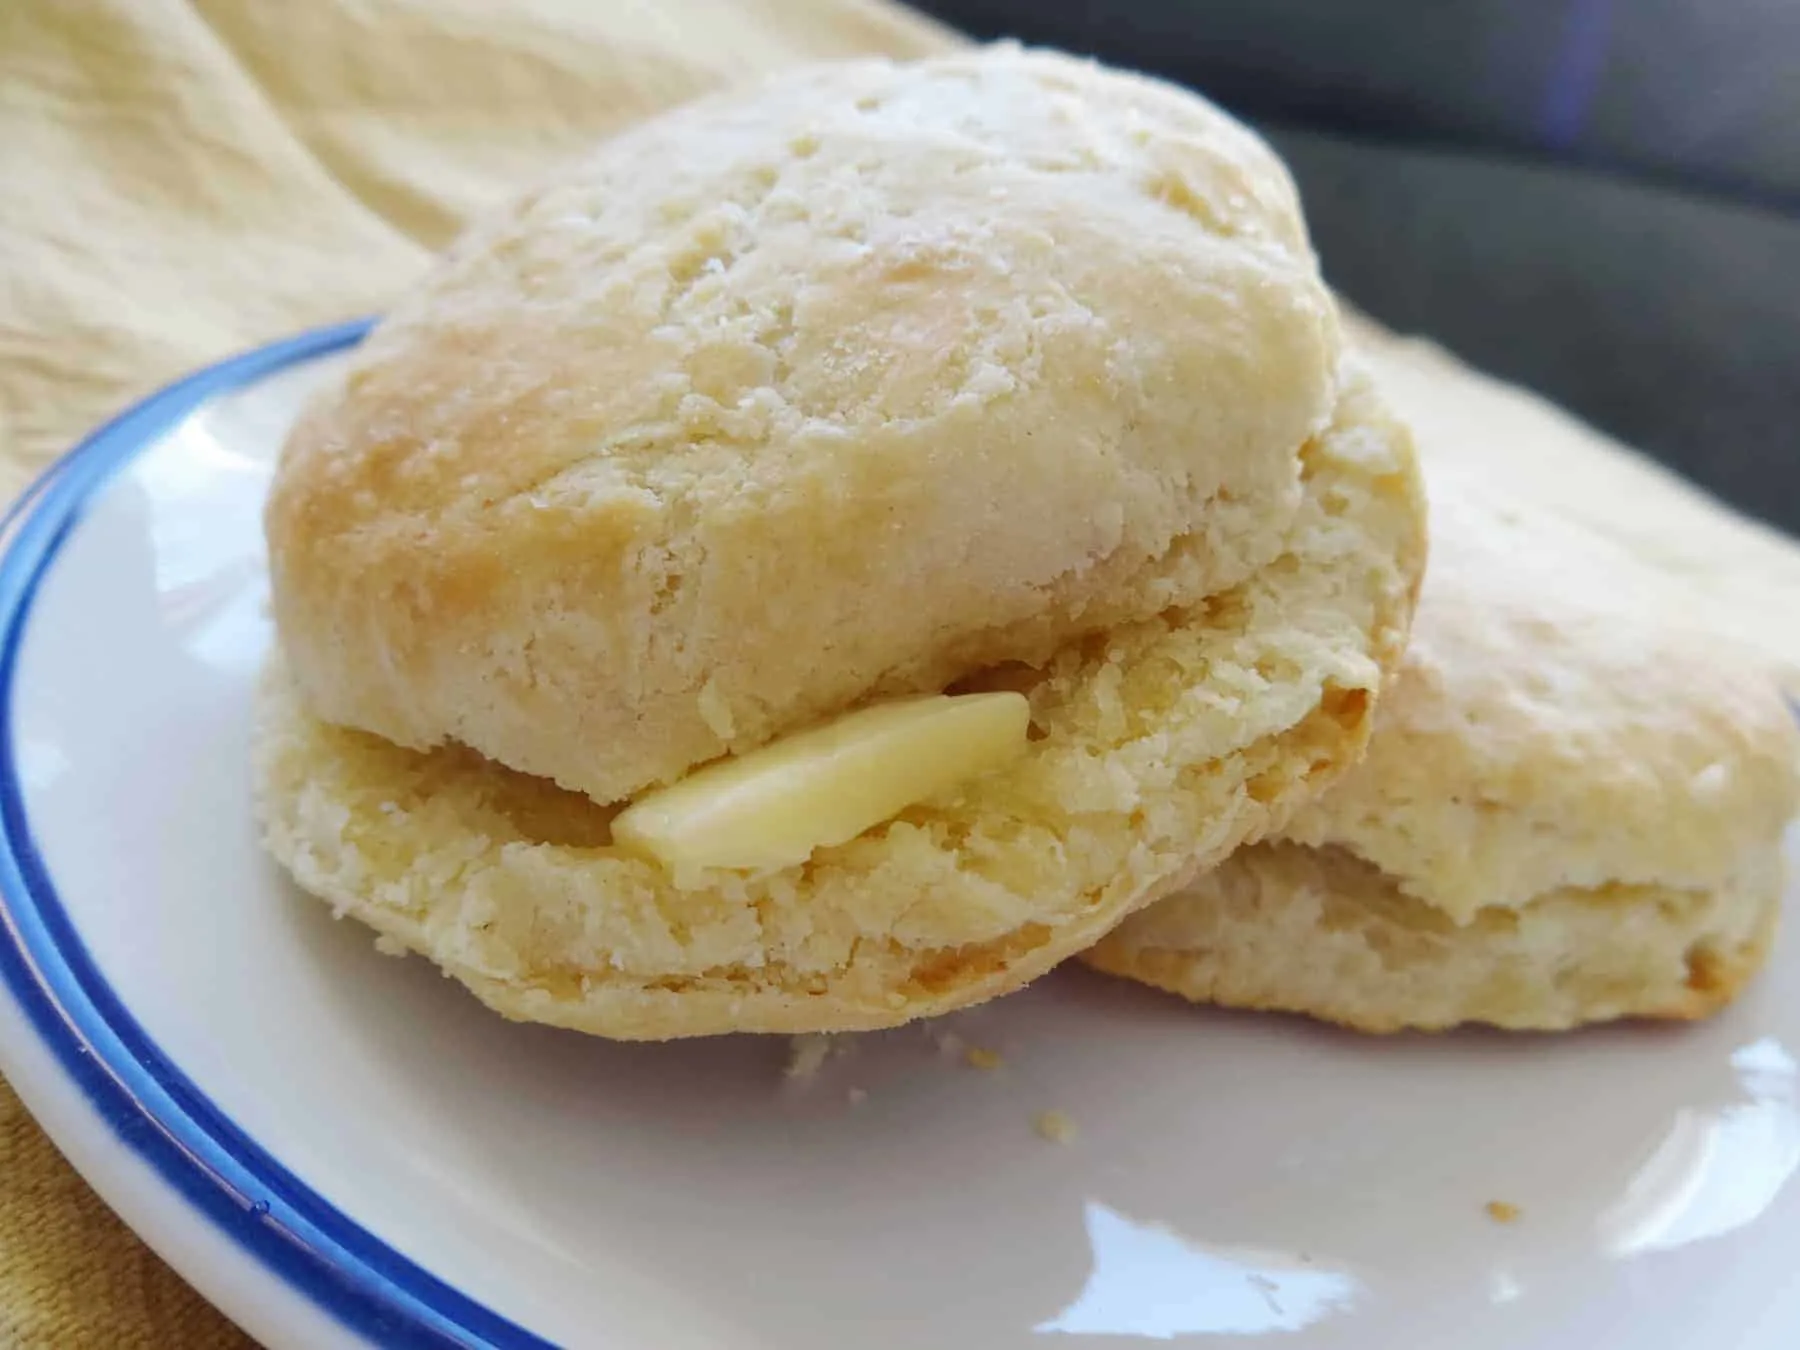 Two yeast-free biscuits on a blue and white plate.